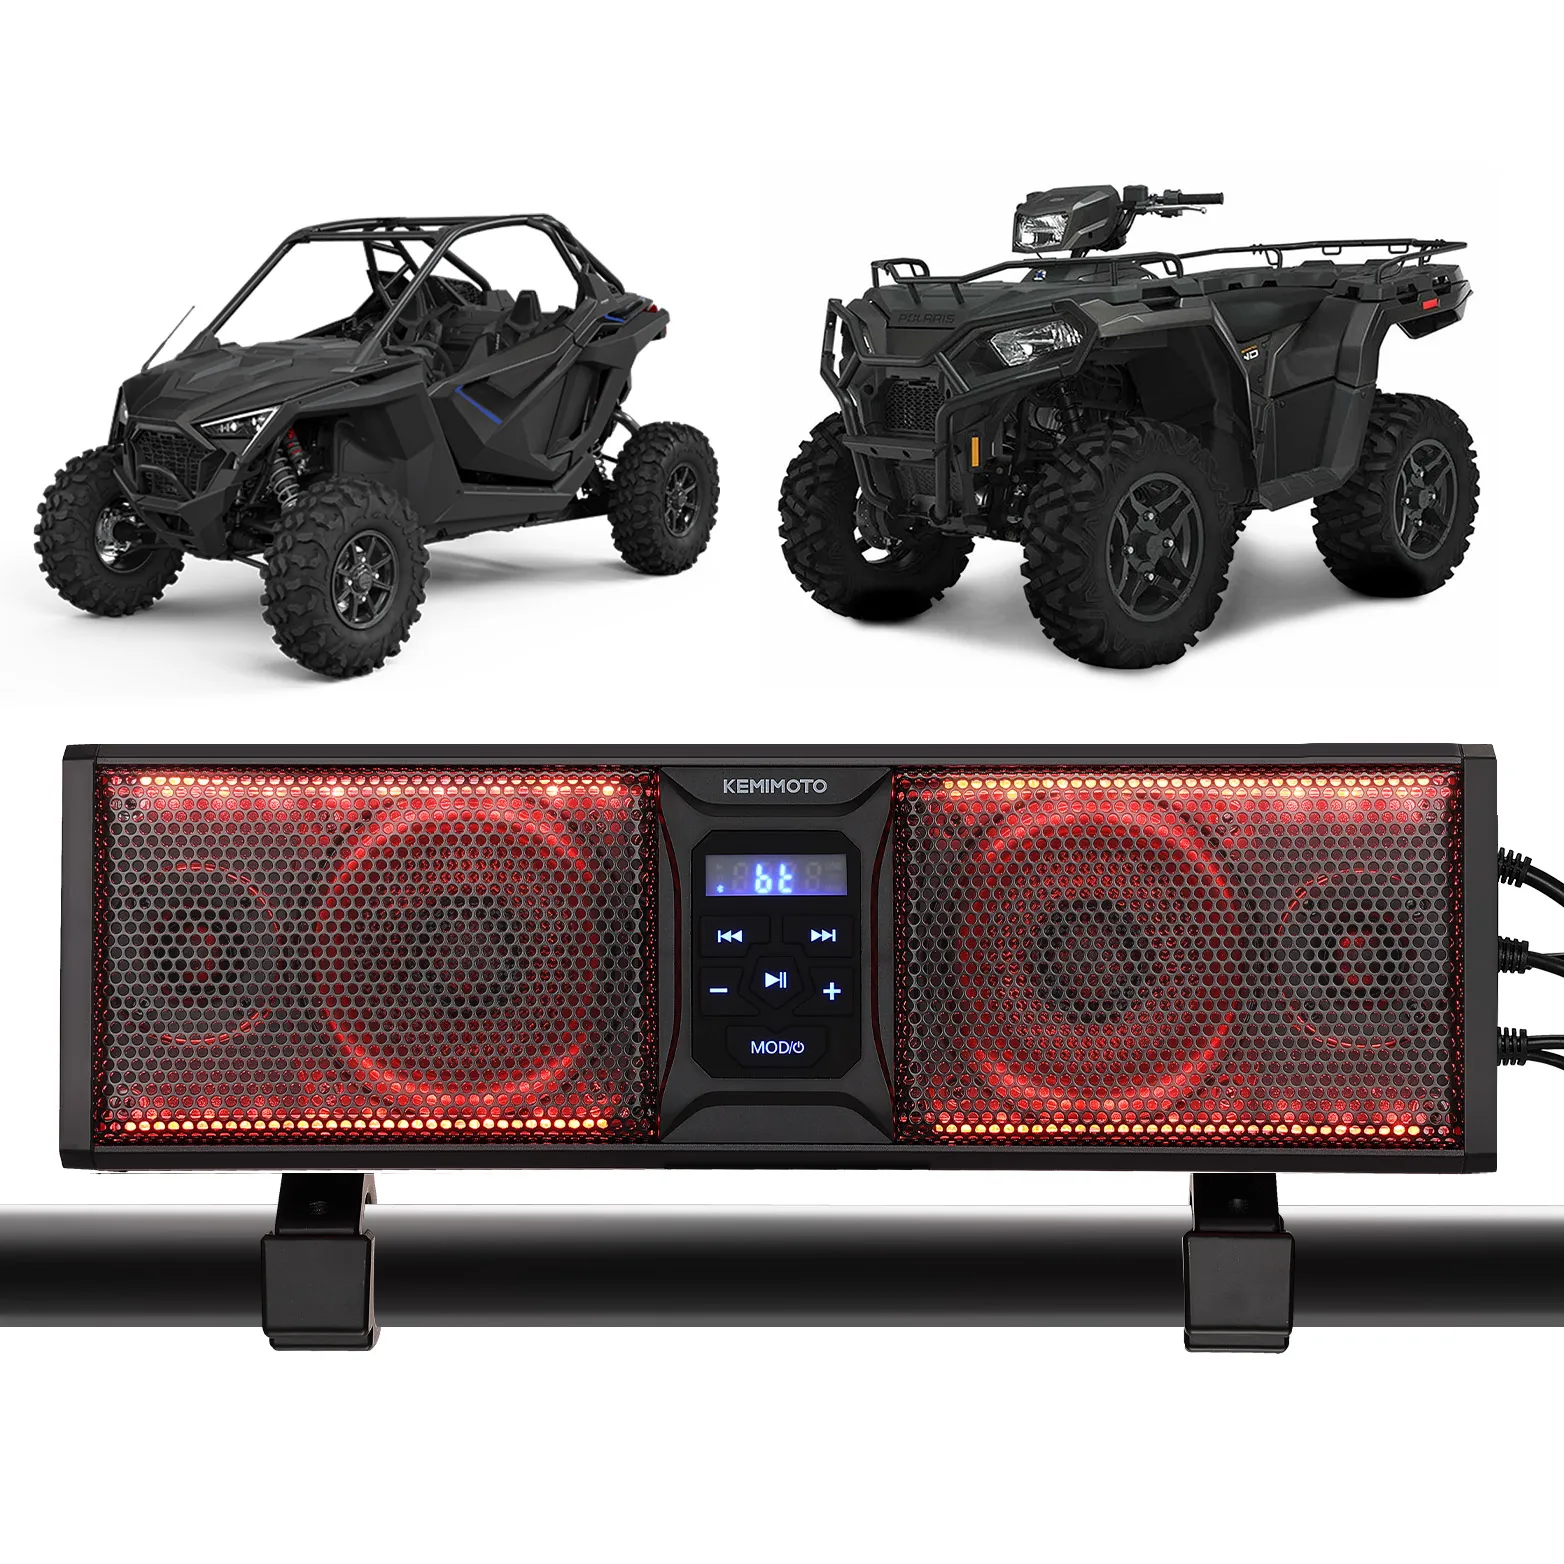 16inch UTV Sound Bar System SXS Speakers Waterproof Bluetooth Multicolor LED Lighting for Can-Am X3 Compatible with Polaris RZR hot 1 32 scale wheels mclaren 600lt super sport car metal model with light and sound diecast pull back vehicle toys collection